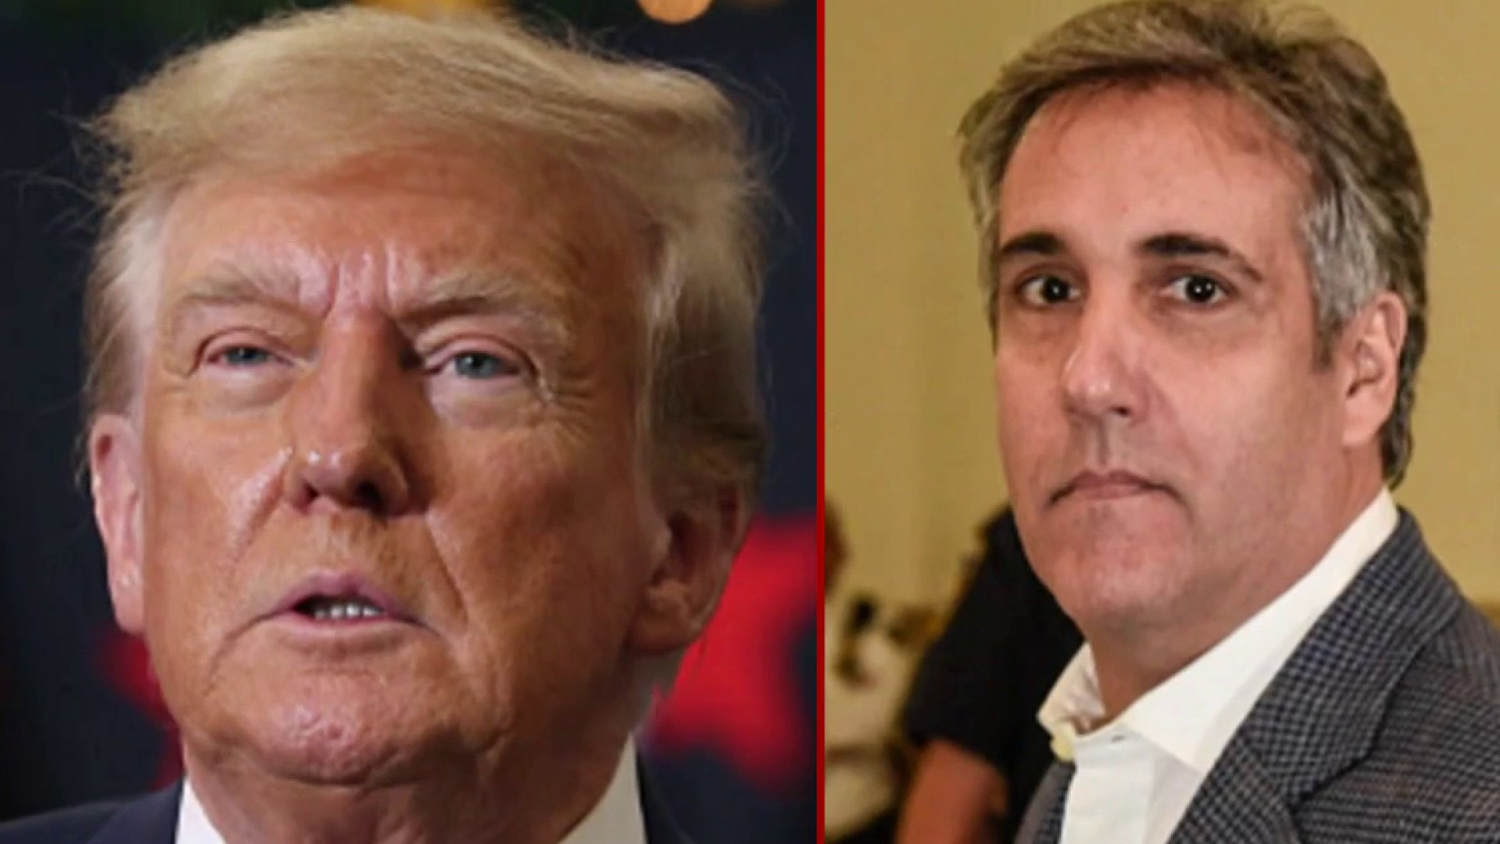 Donald Trump comes face to face with his ‘former pit bull’ Michael Cohen in hush money trial